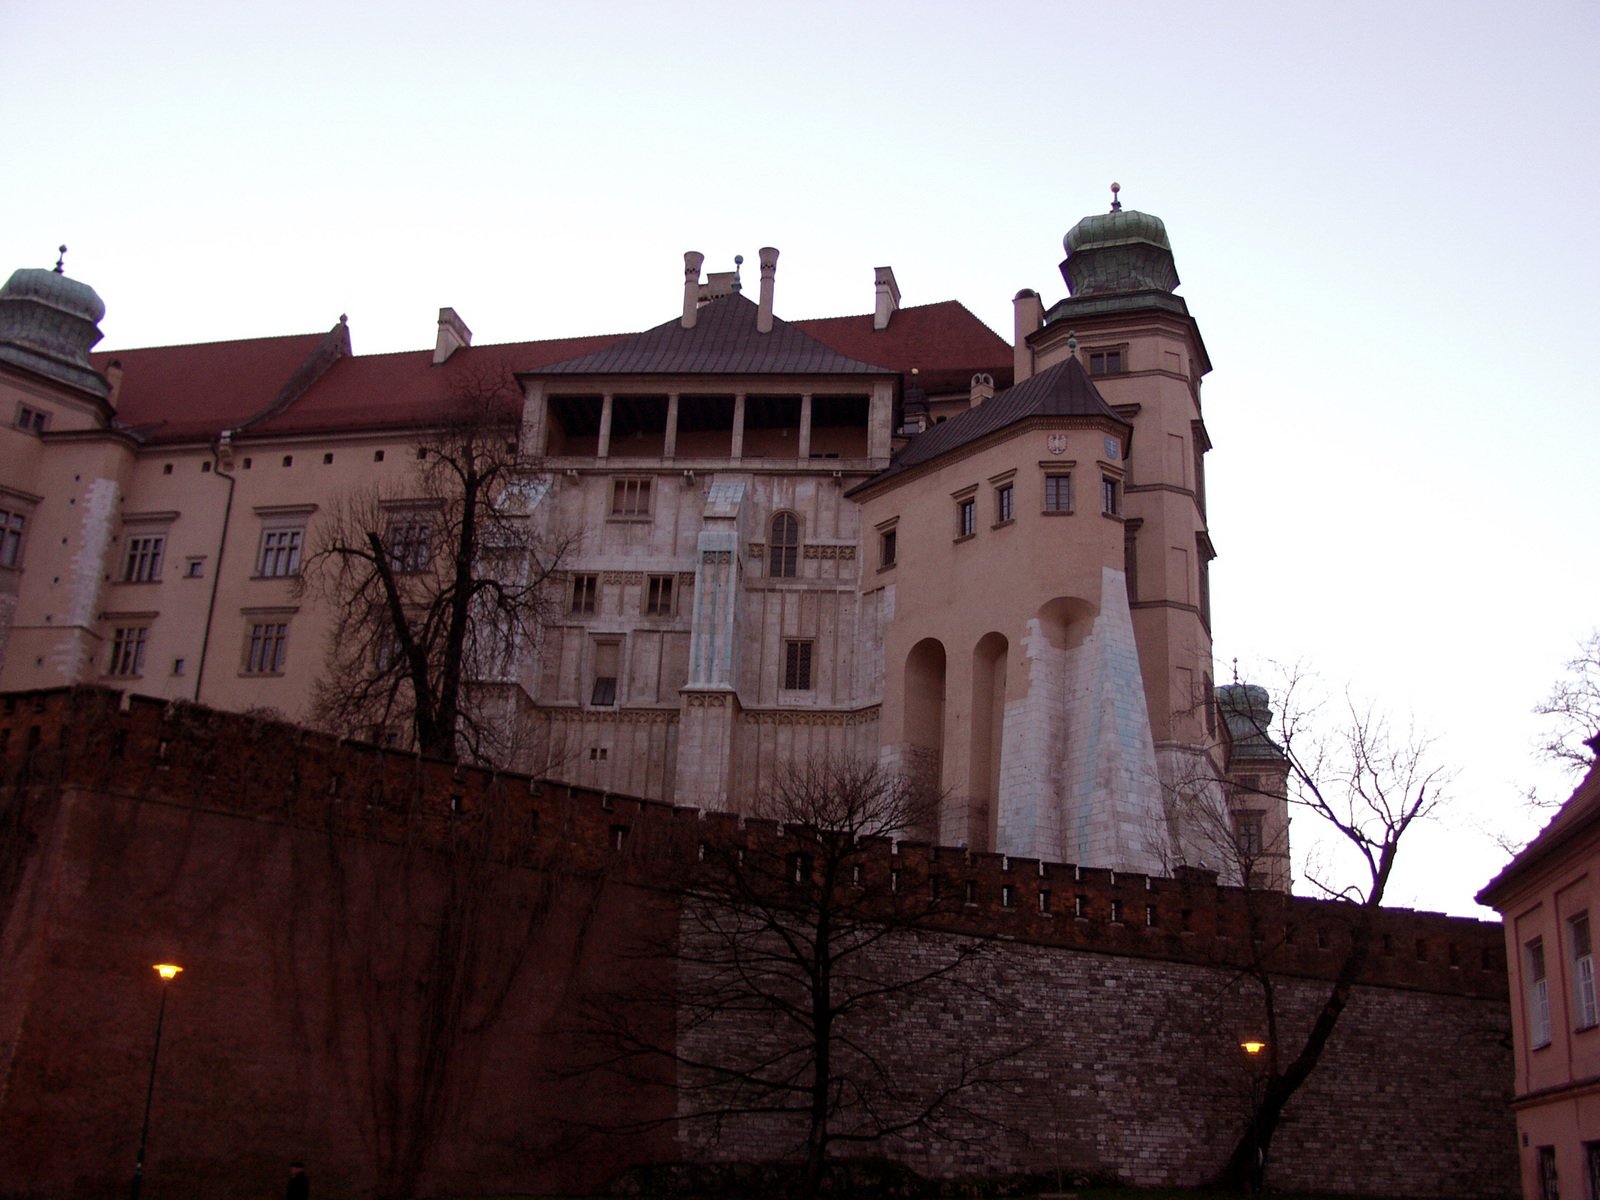 the castle is on top of a large rock wall